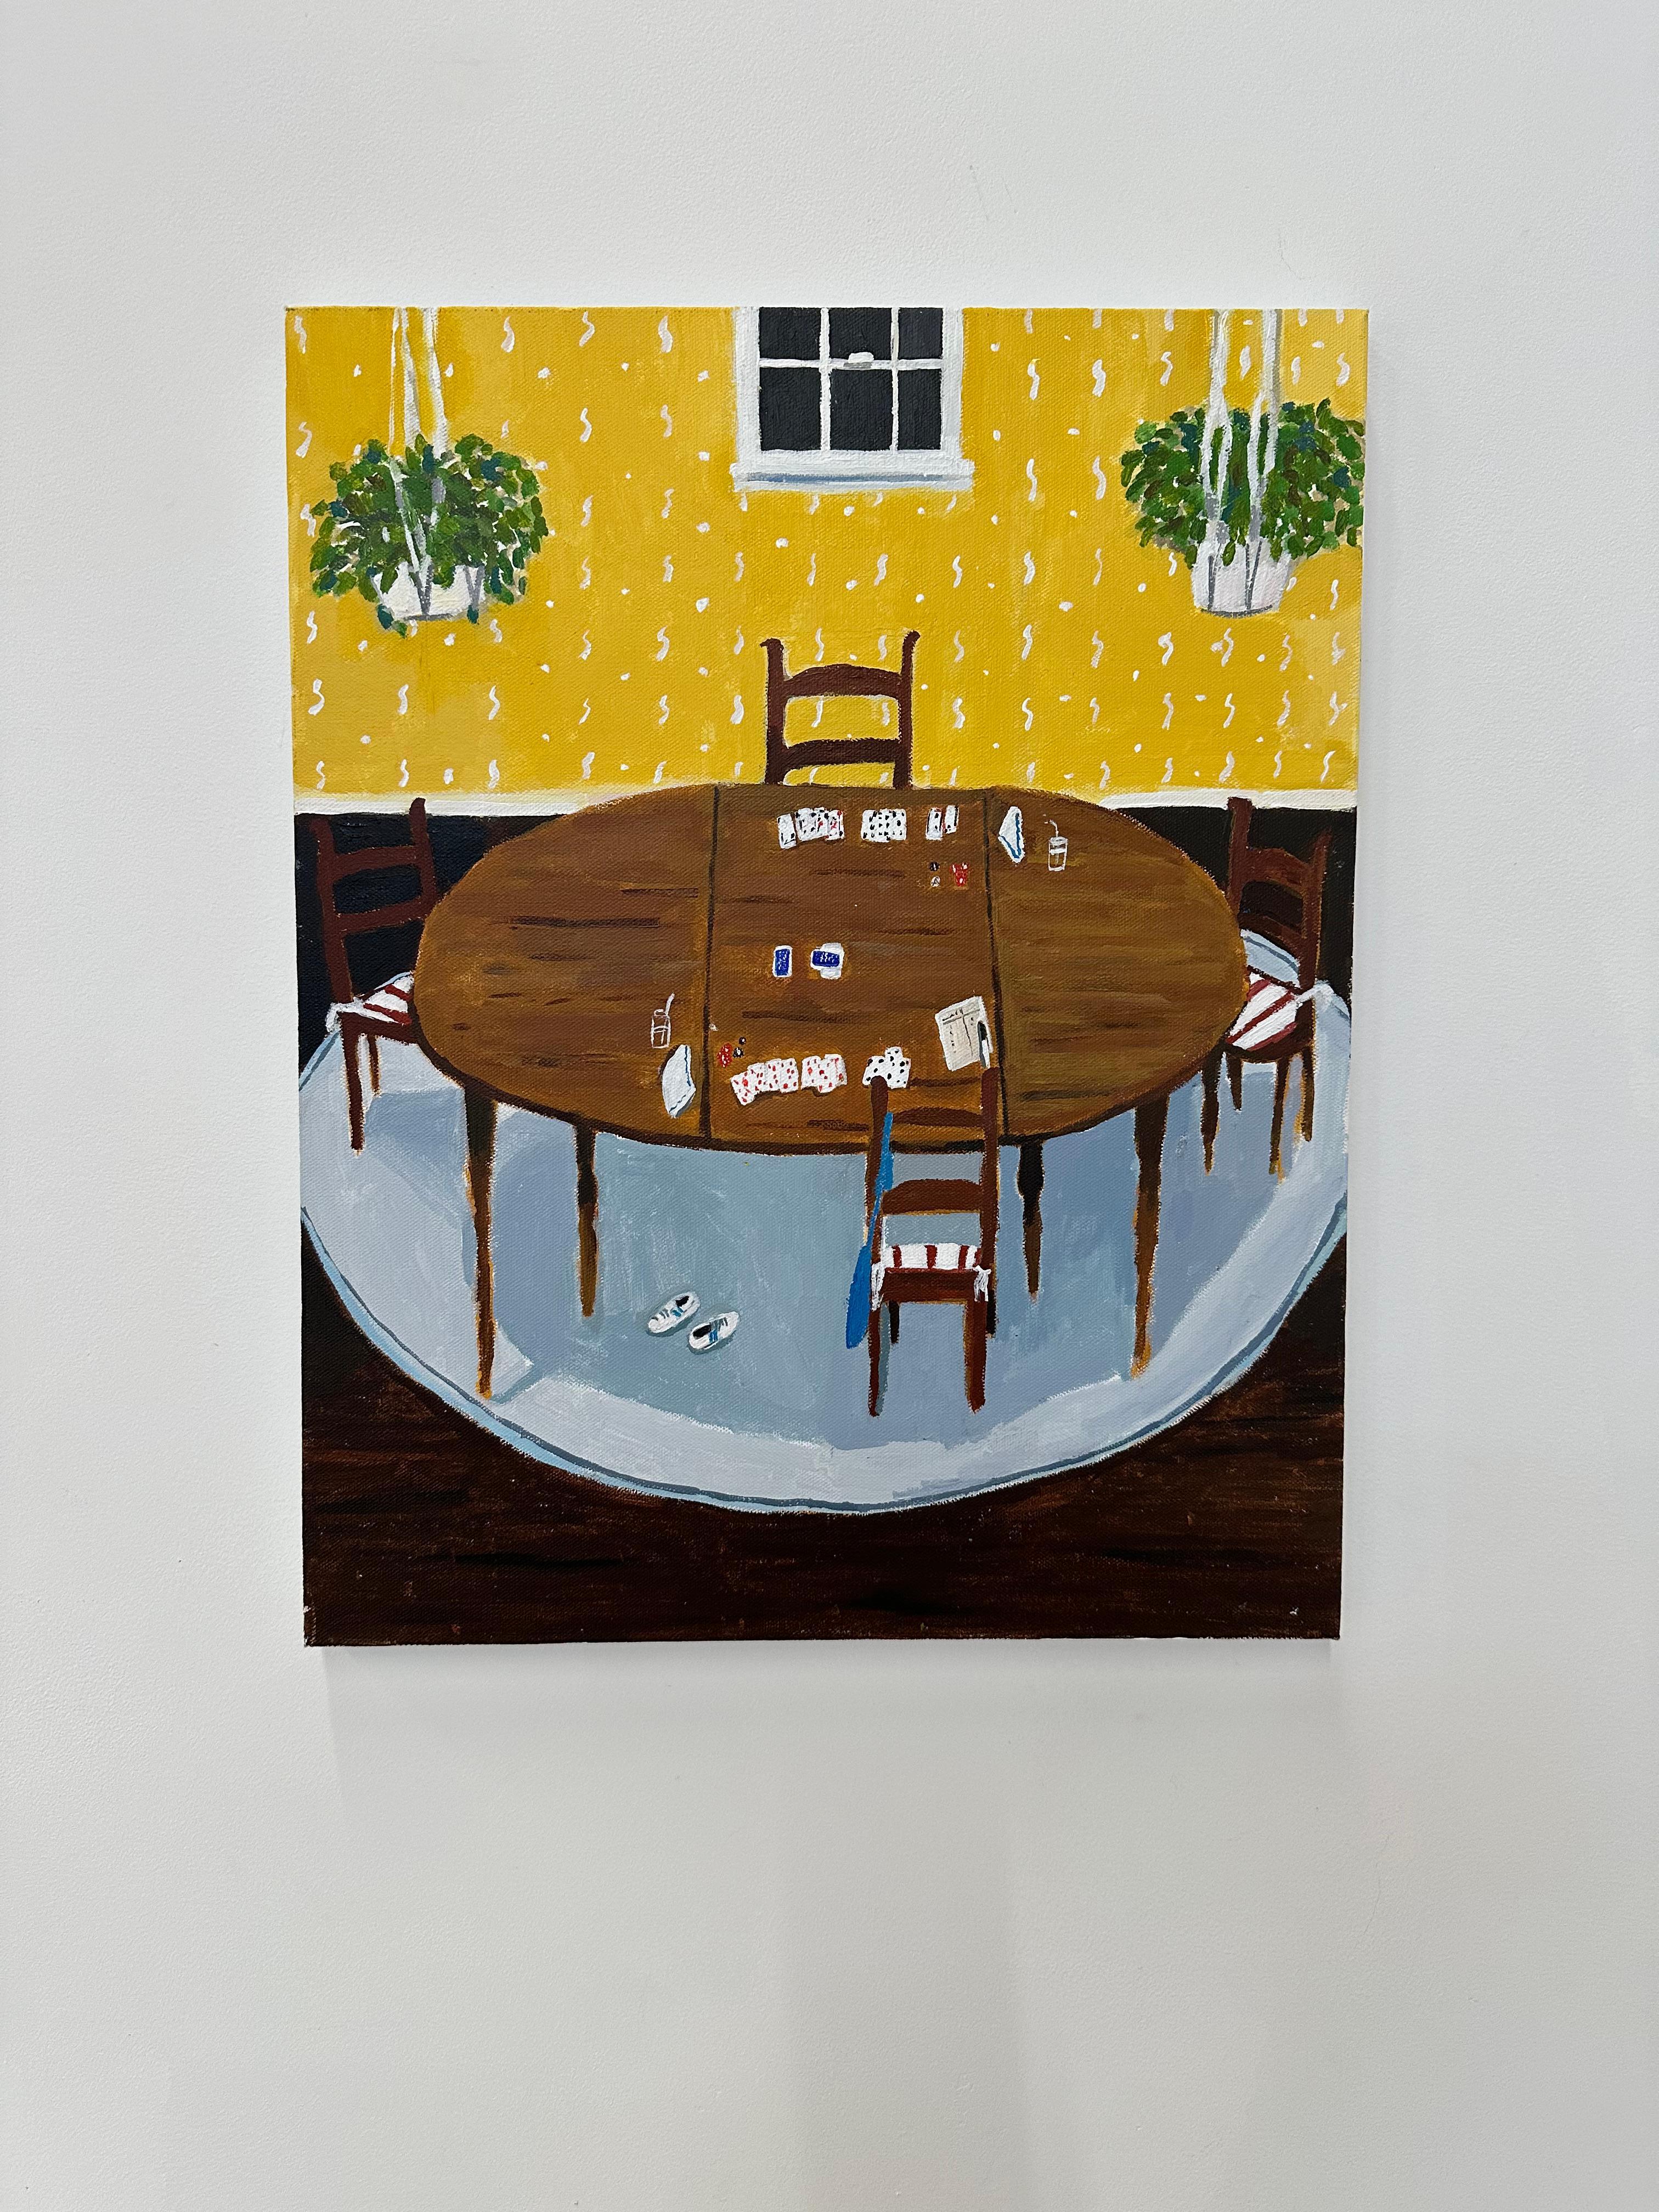 Gin Game in Yellow Room, Dining, Wooden Table, Chairs, Card Game, Green Plants - Painting by Polly Shindler